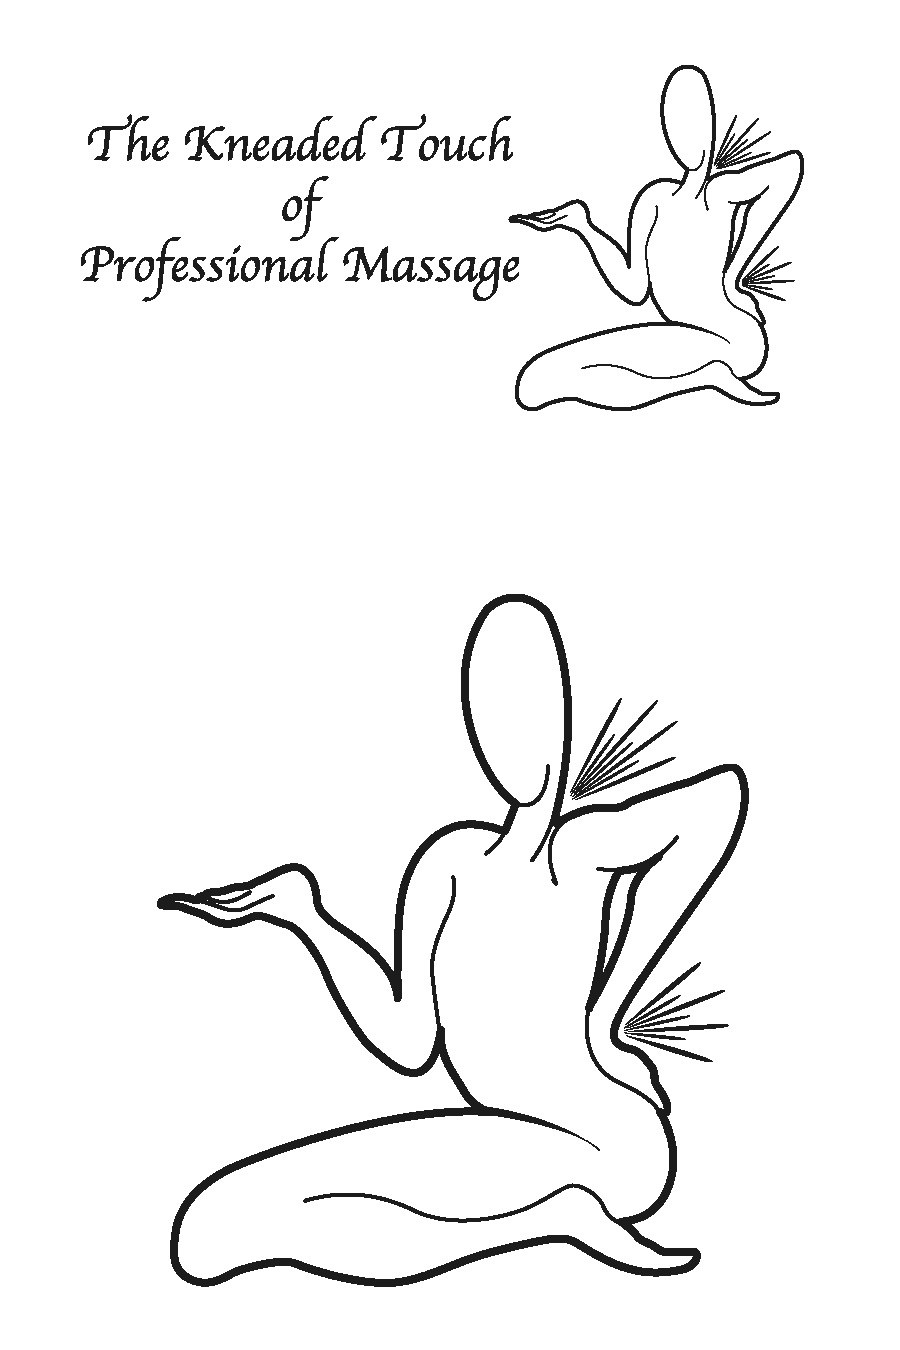 The Kneaded Touch of Professional Massage